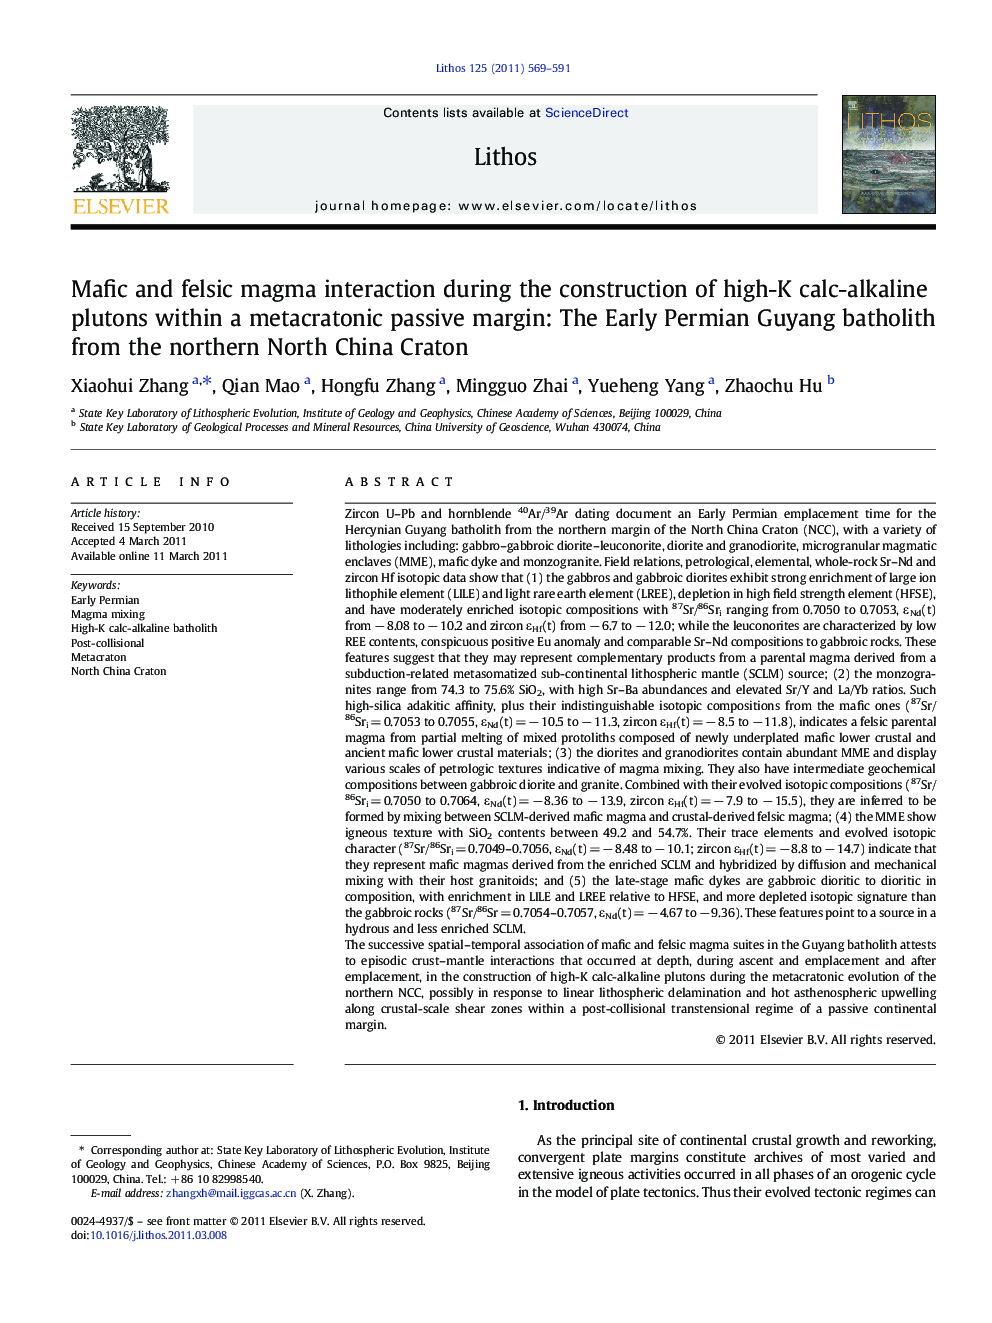 Mafic and felsic magma interaction during the construction of high-K calc-alkaline plutons within a metacratonic passive margin: The Early Permian Guyang batholith from the northern North China Craton